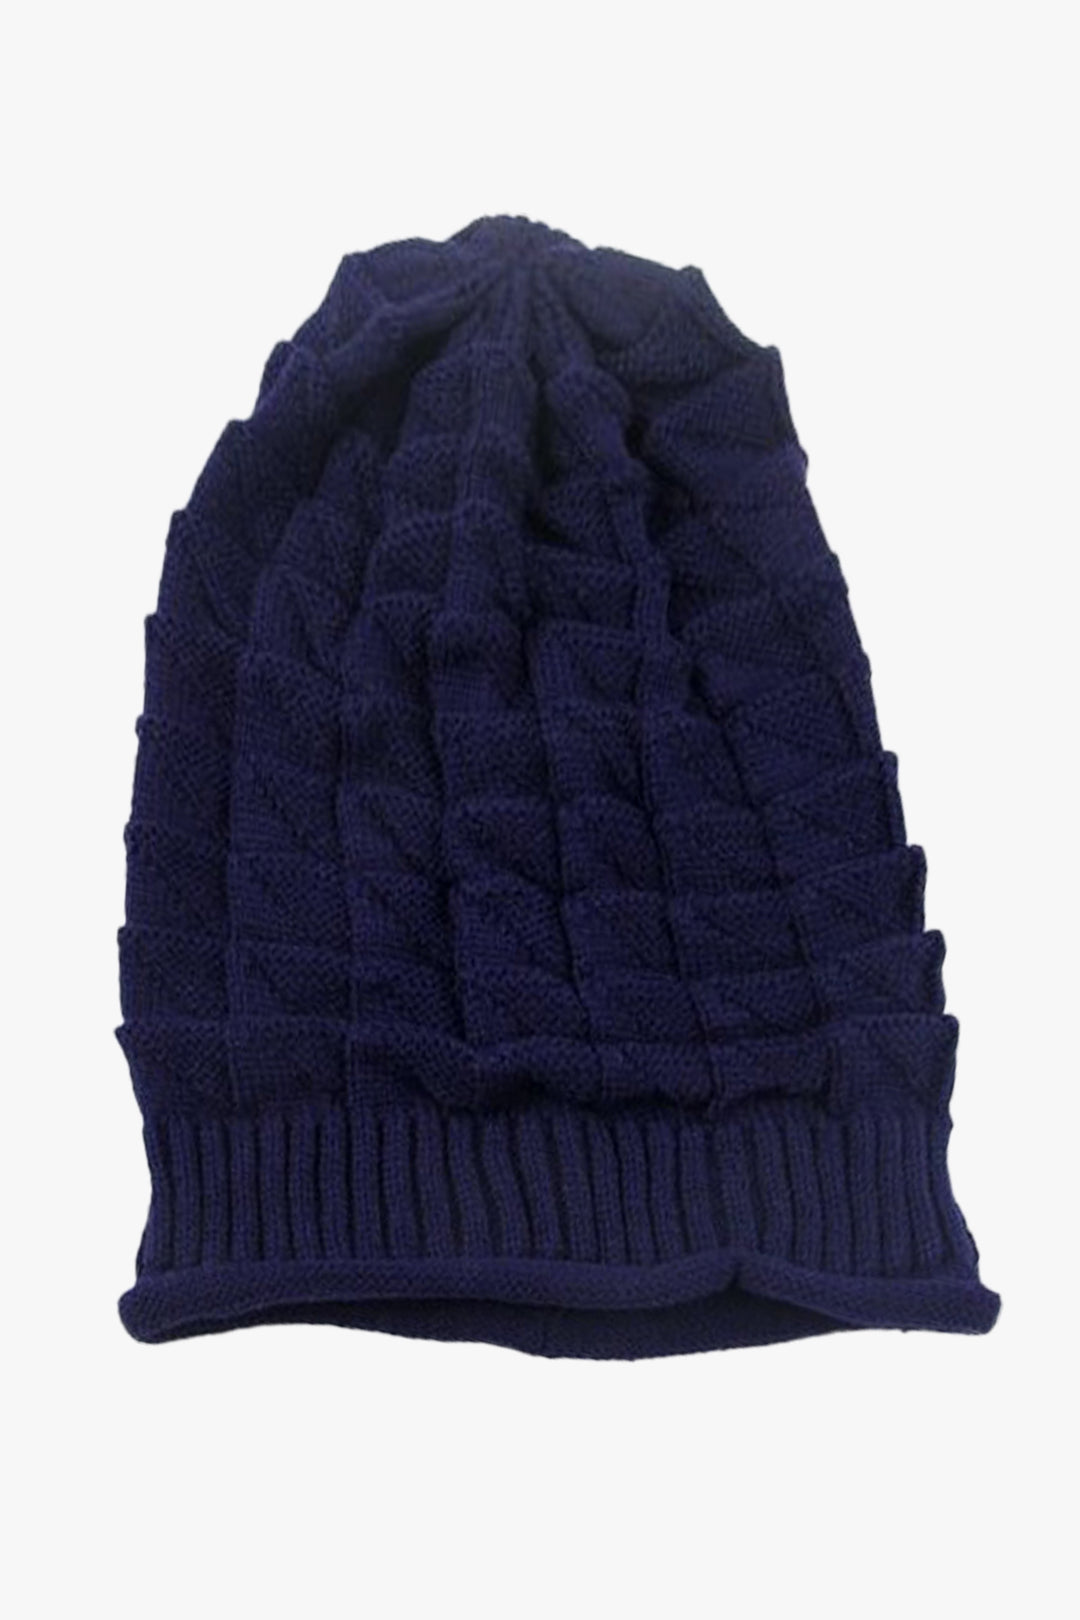 Navy Blue Knitted Baggy Beanie